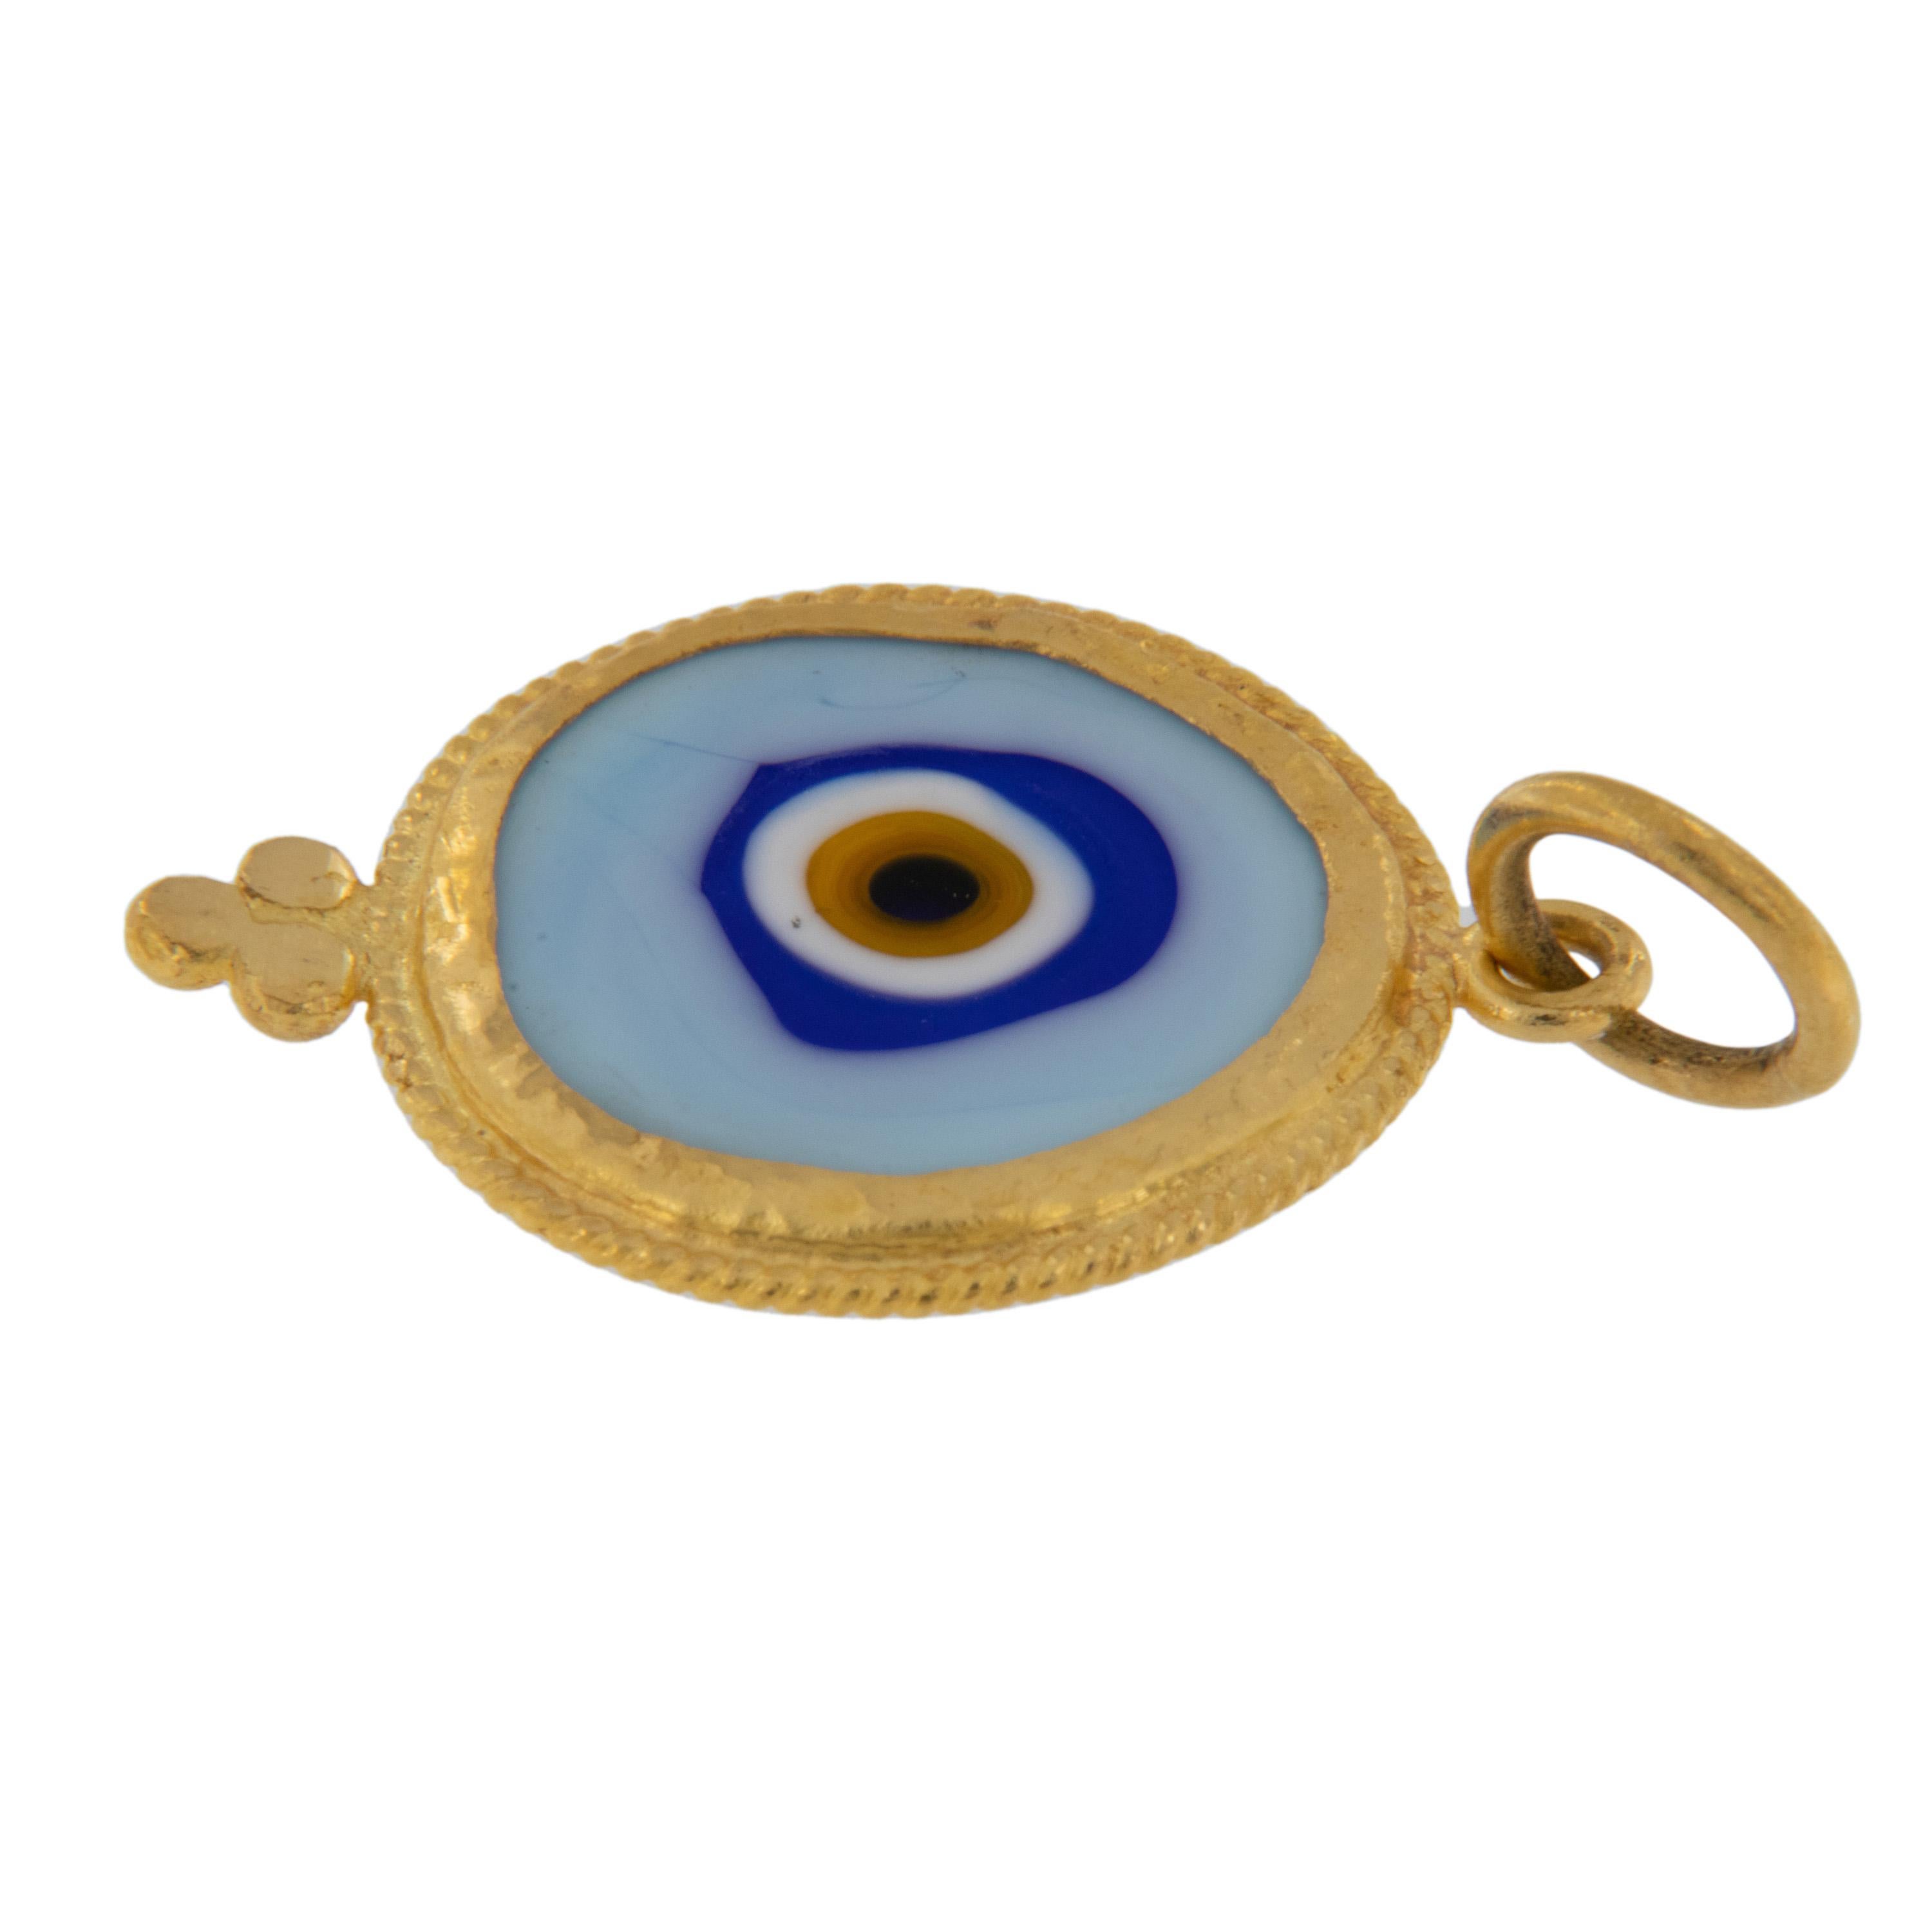 Rarest of all the golds, 24 karat gold is valued by all discerning investors. With it's unmistakable warm yellow color & hammered finish, this large evil eye pendant / charm talisman is thought to keep you safe from curses. Light Blue: Color of the